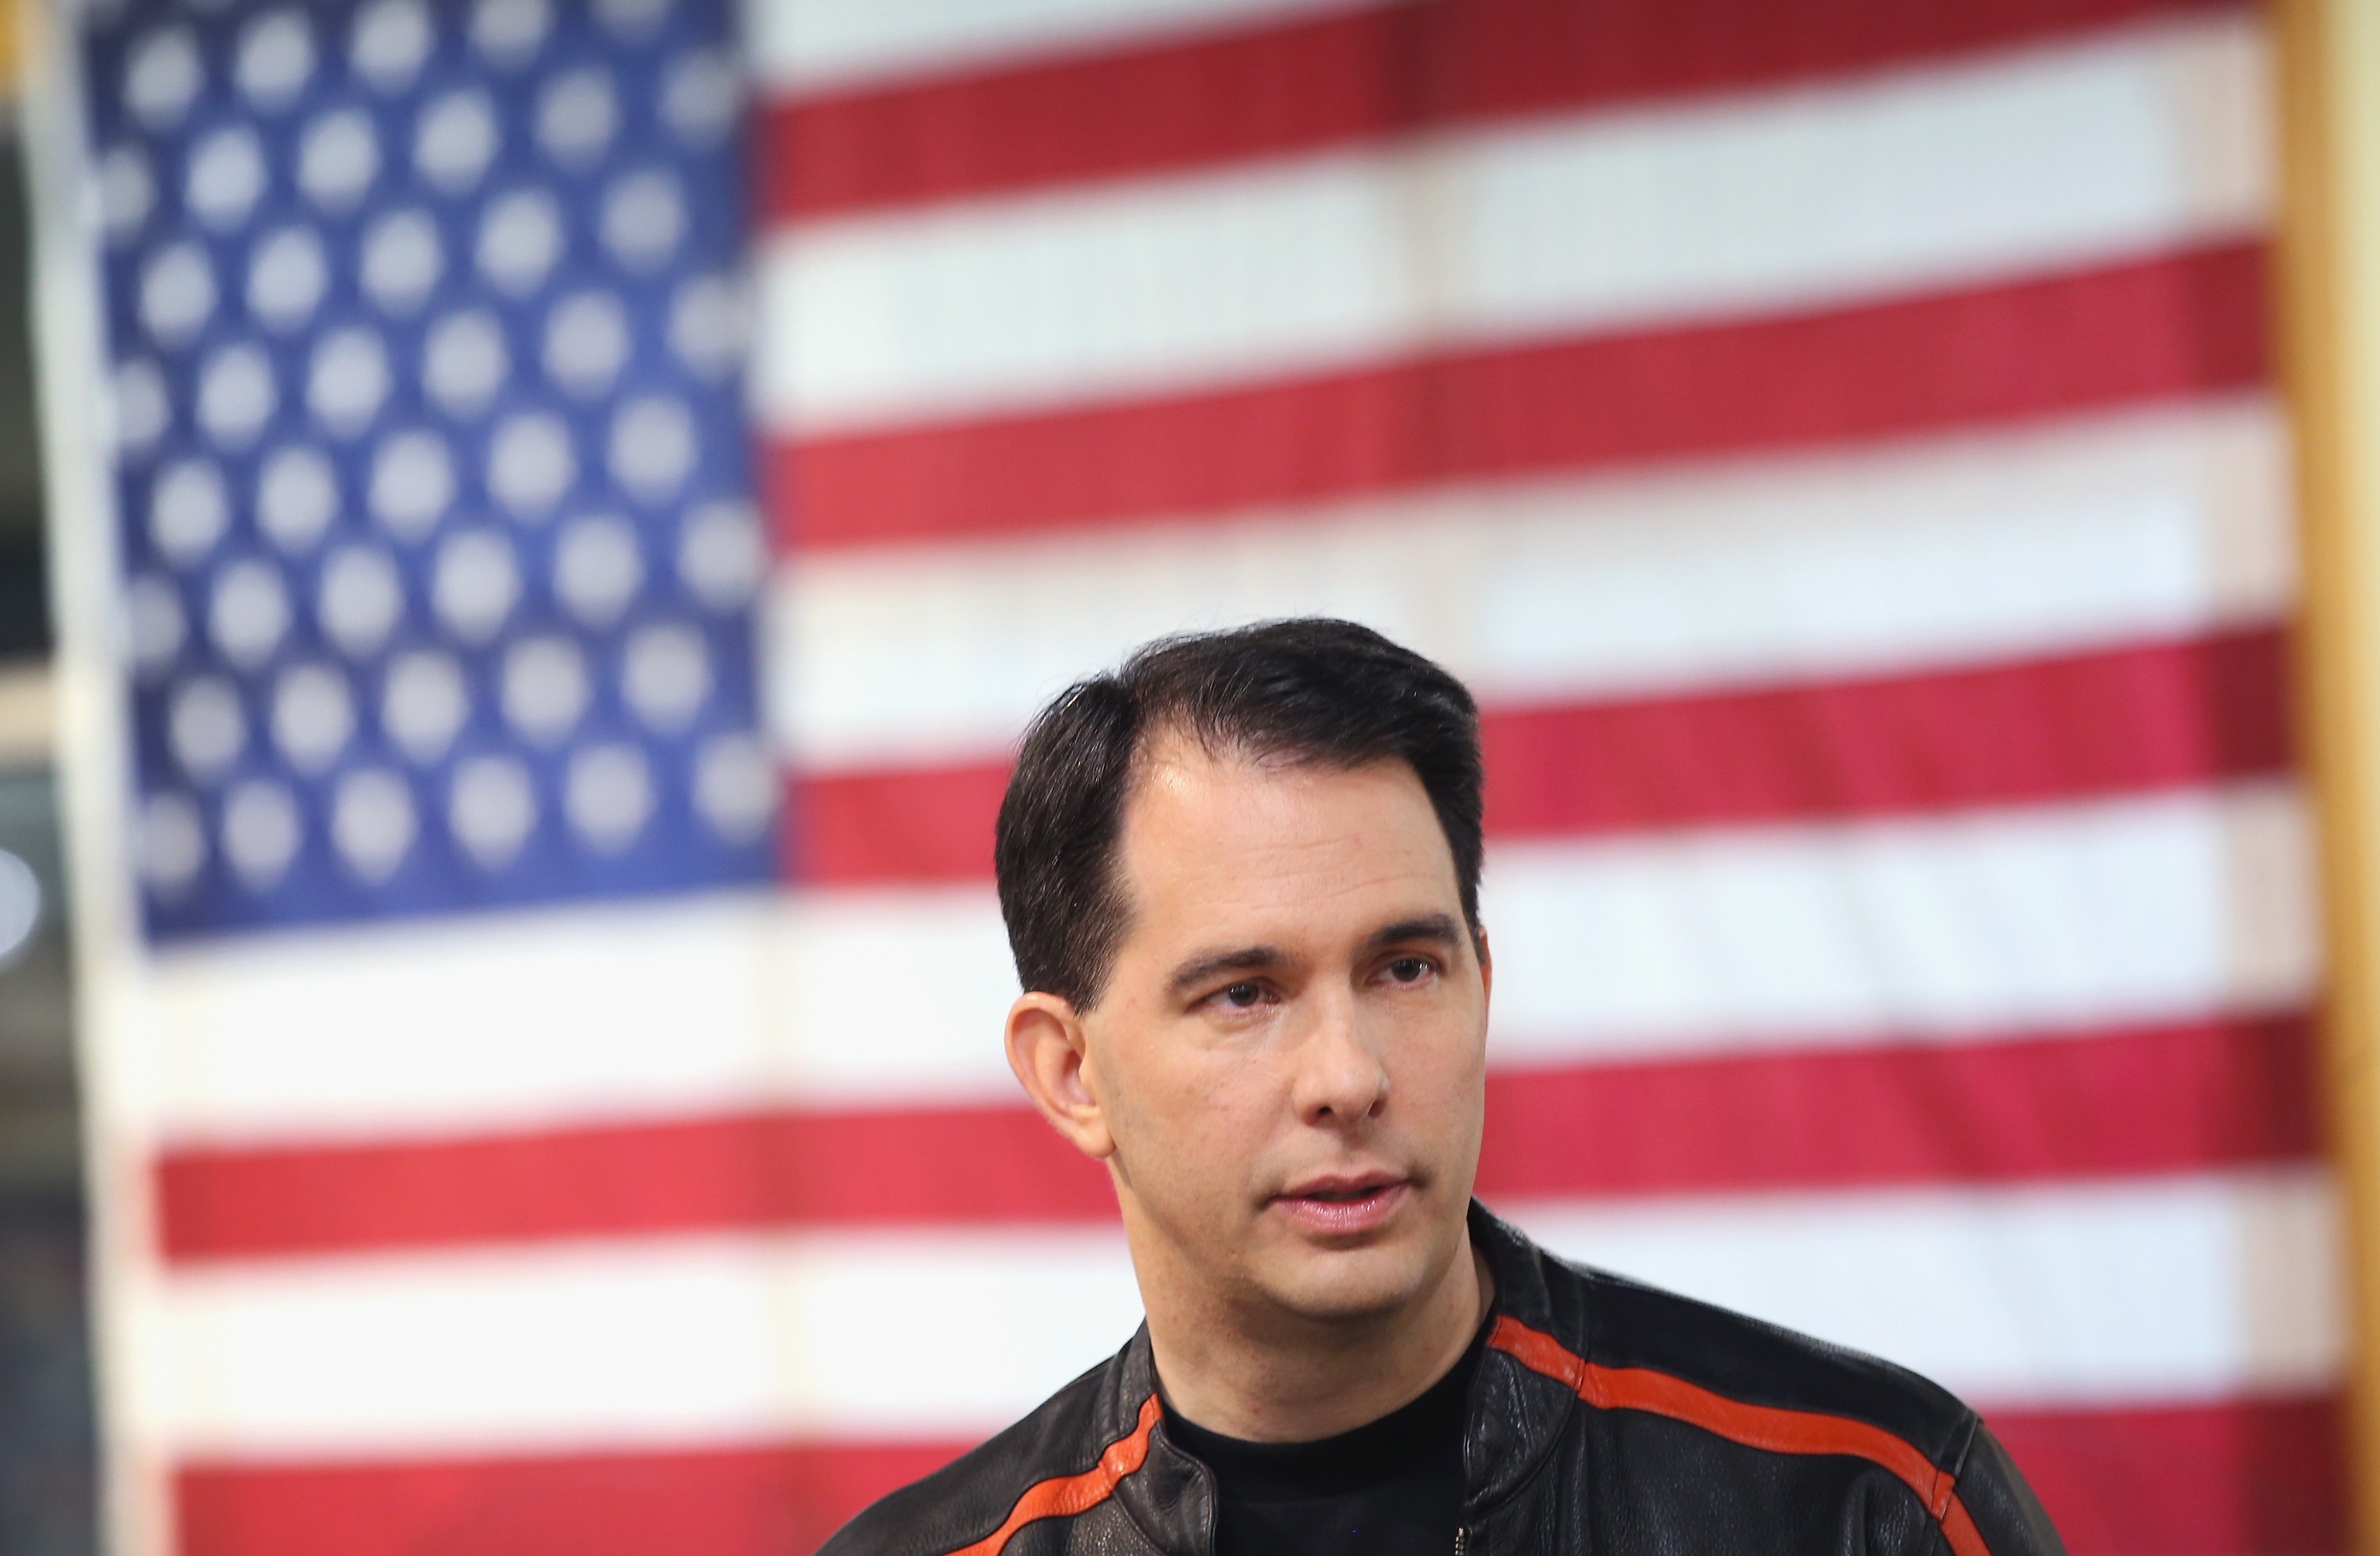 Wisconsin Governor Scott Walker gets ready to participate in a Roast and Ride event hosted by freshman Sen. Joni Ernst (R-IA) on June 5, 2015 near Des Moines, Iowa. (Scott Olson—Getty Images)